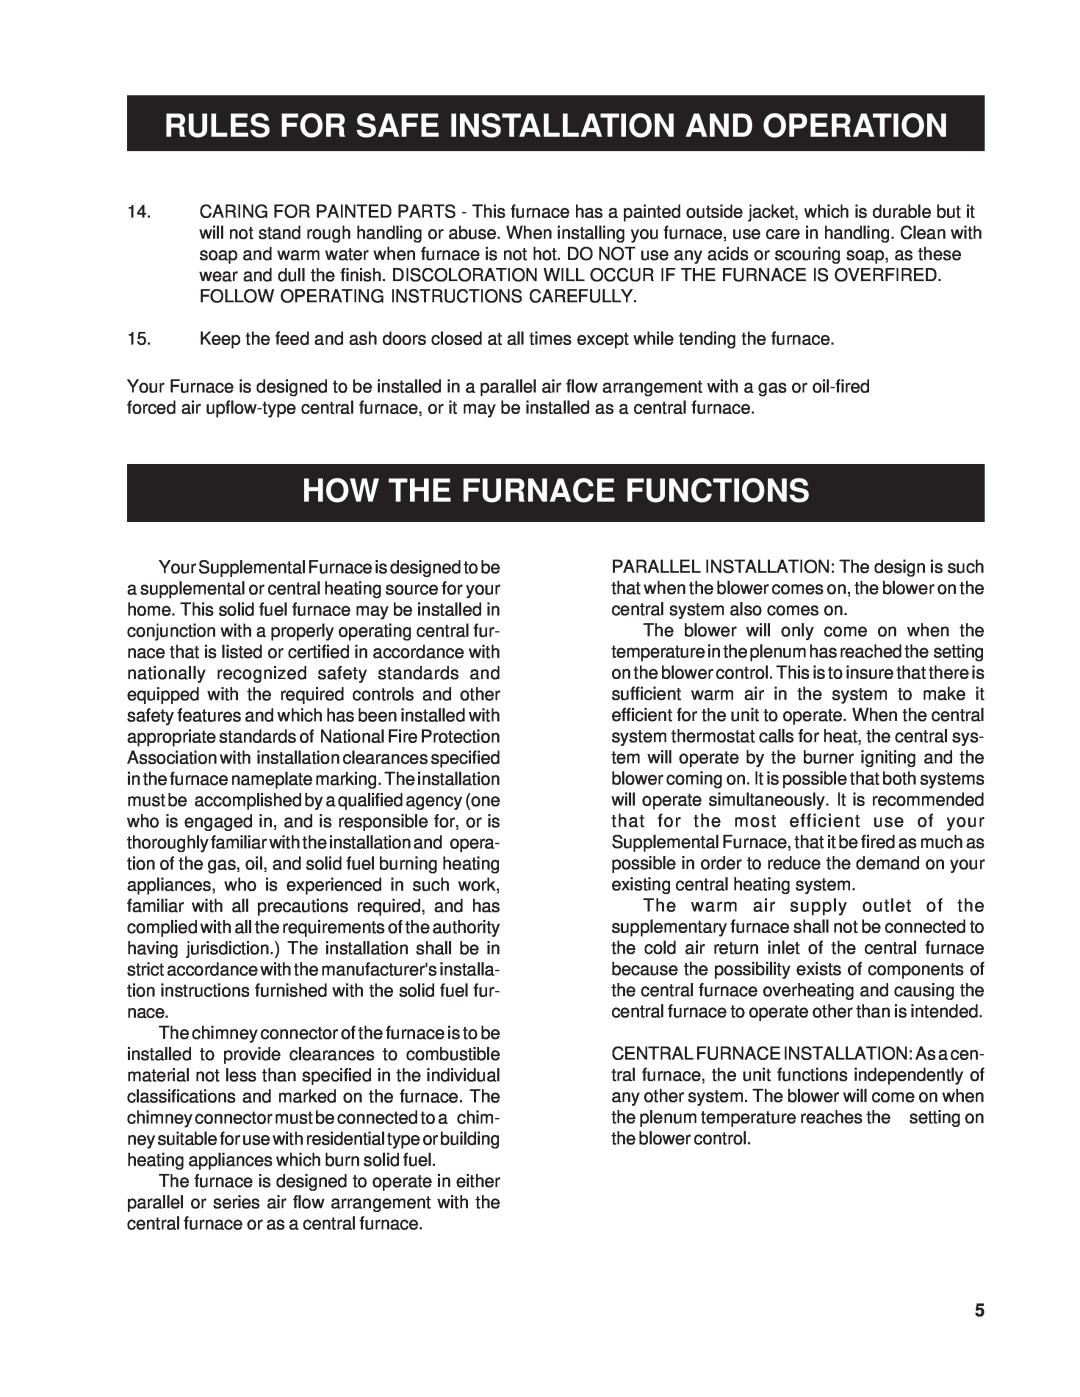 United States Stove 1200G owner manual How The Furnace Functions, Rules For Safe Installation And Operation 